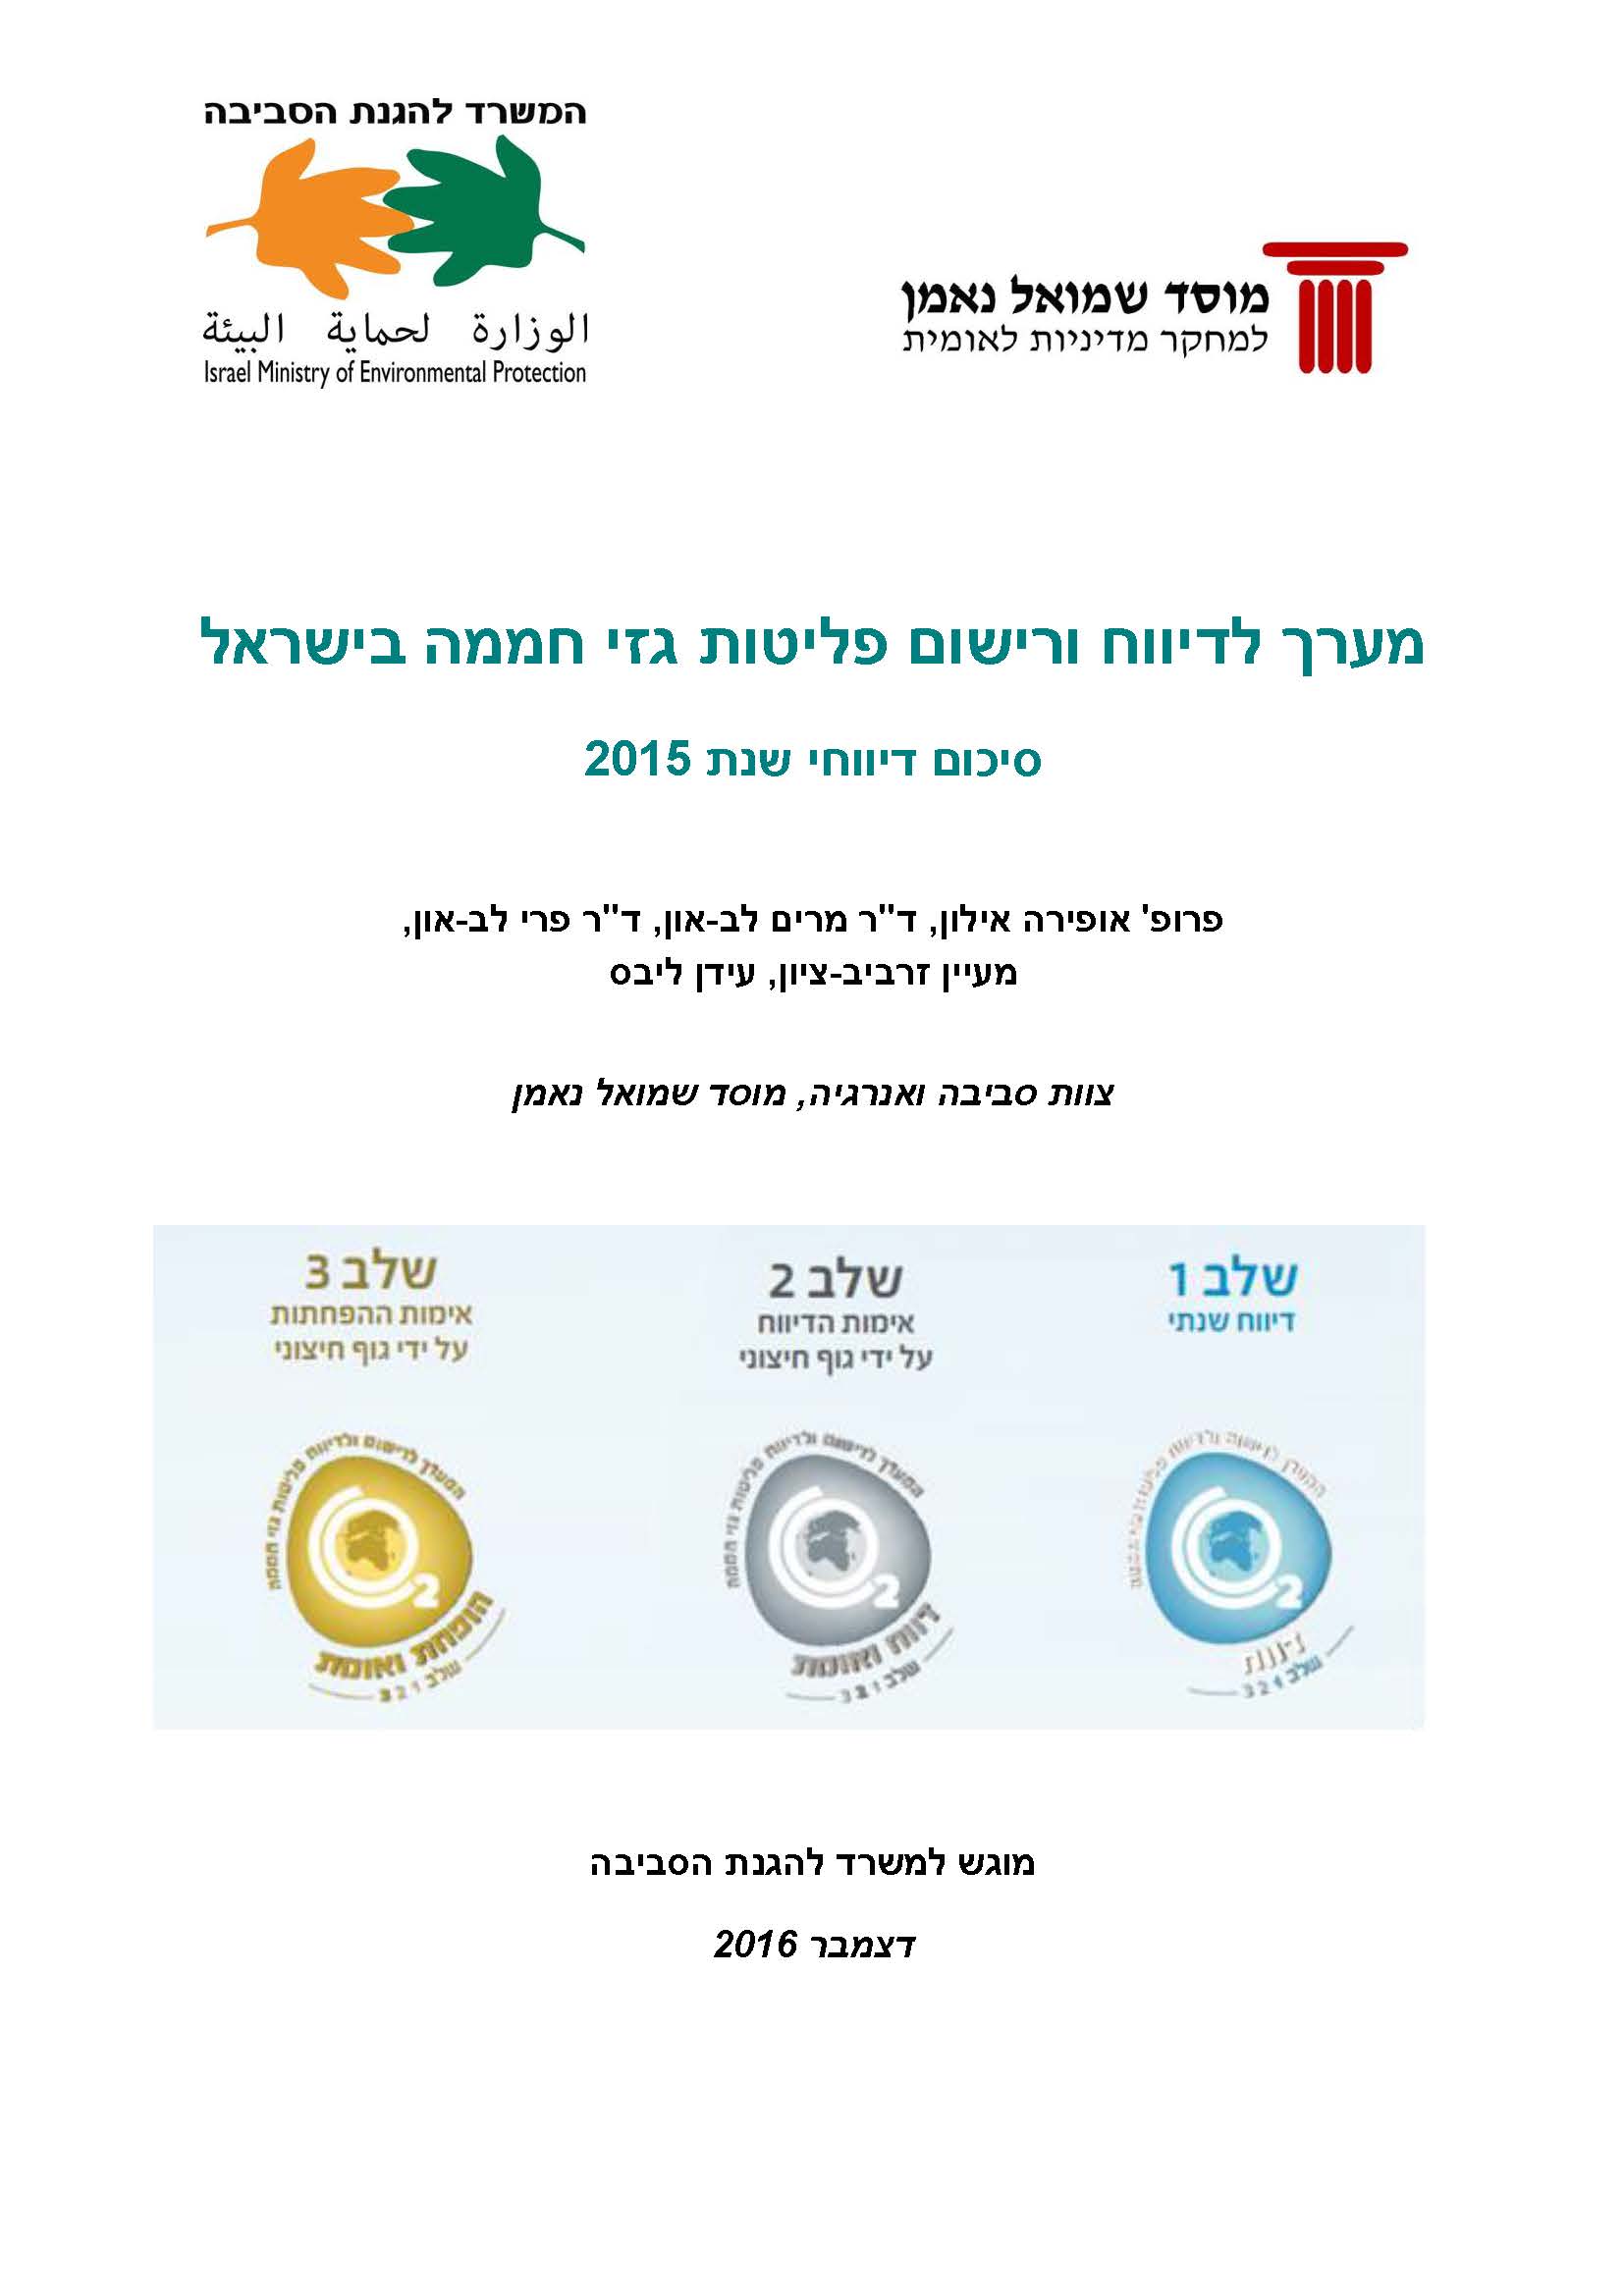 Greenhouse Gas Emissions Reporting and Registration System in Israel: Summary of Reports for 2015